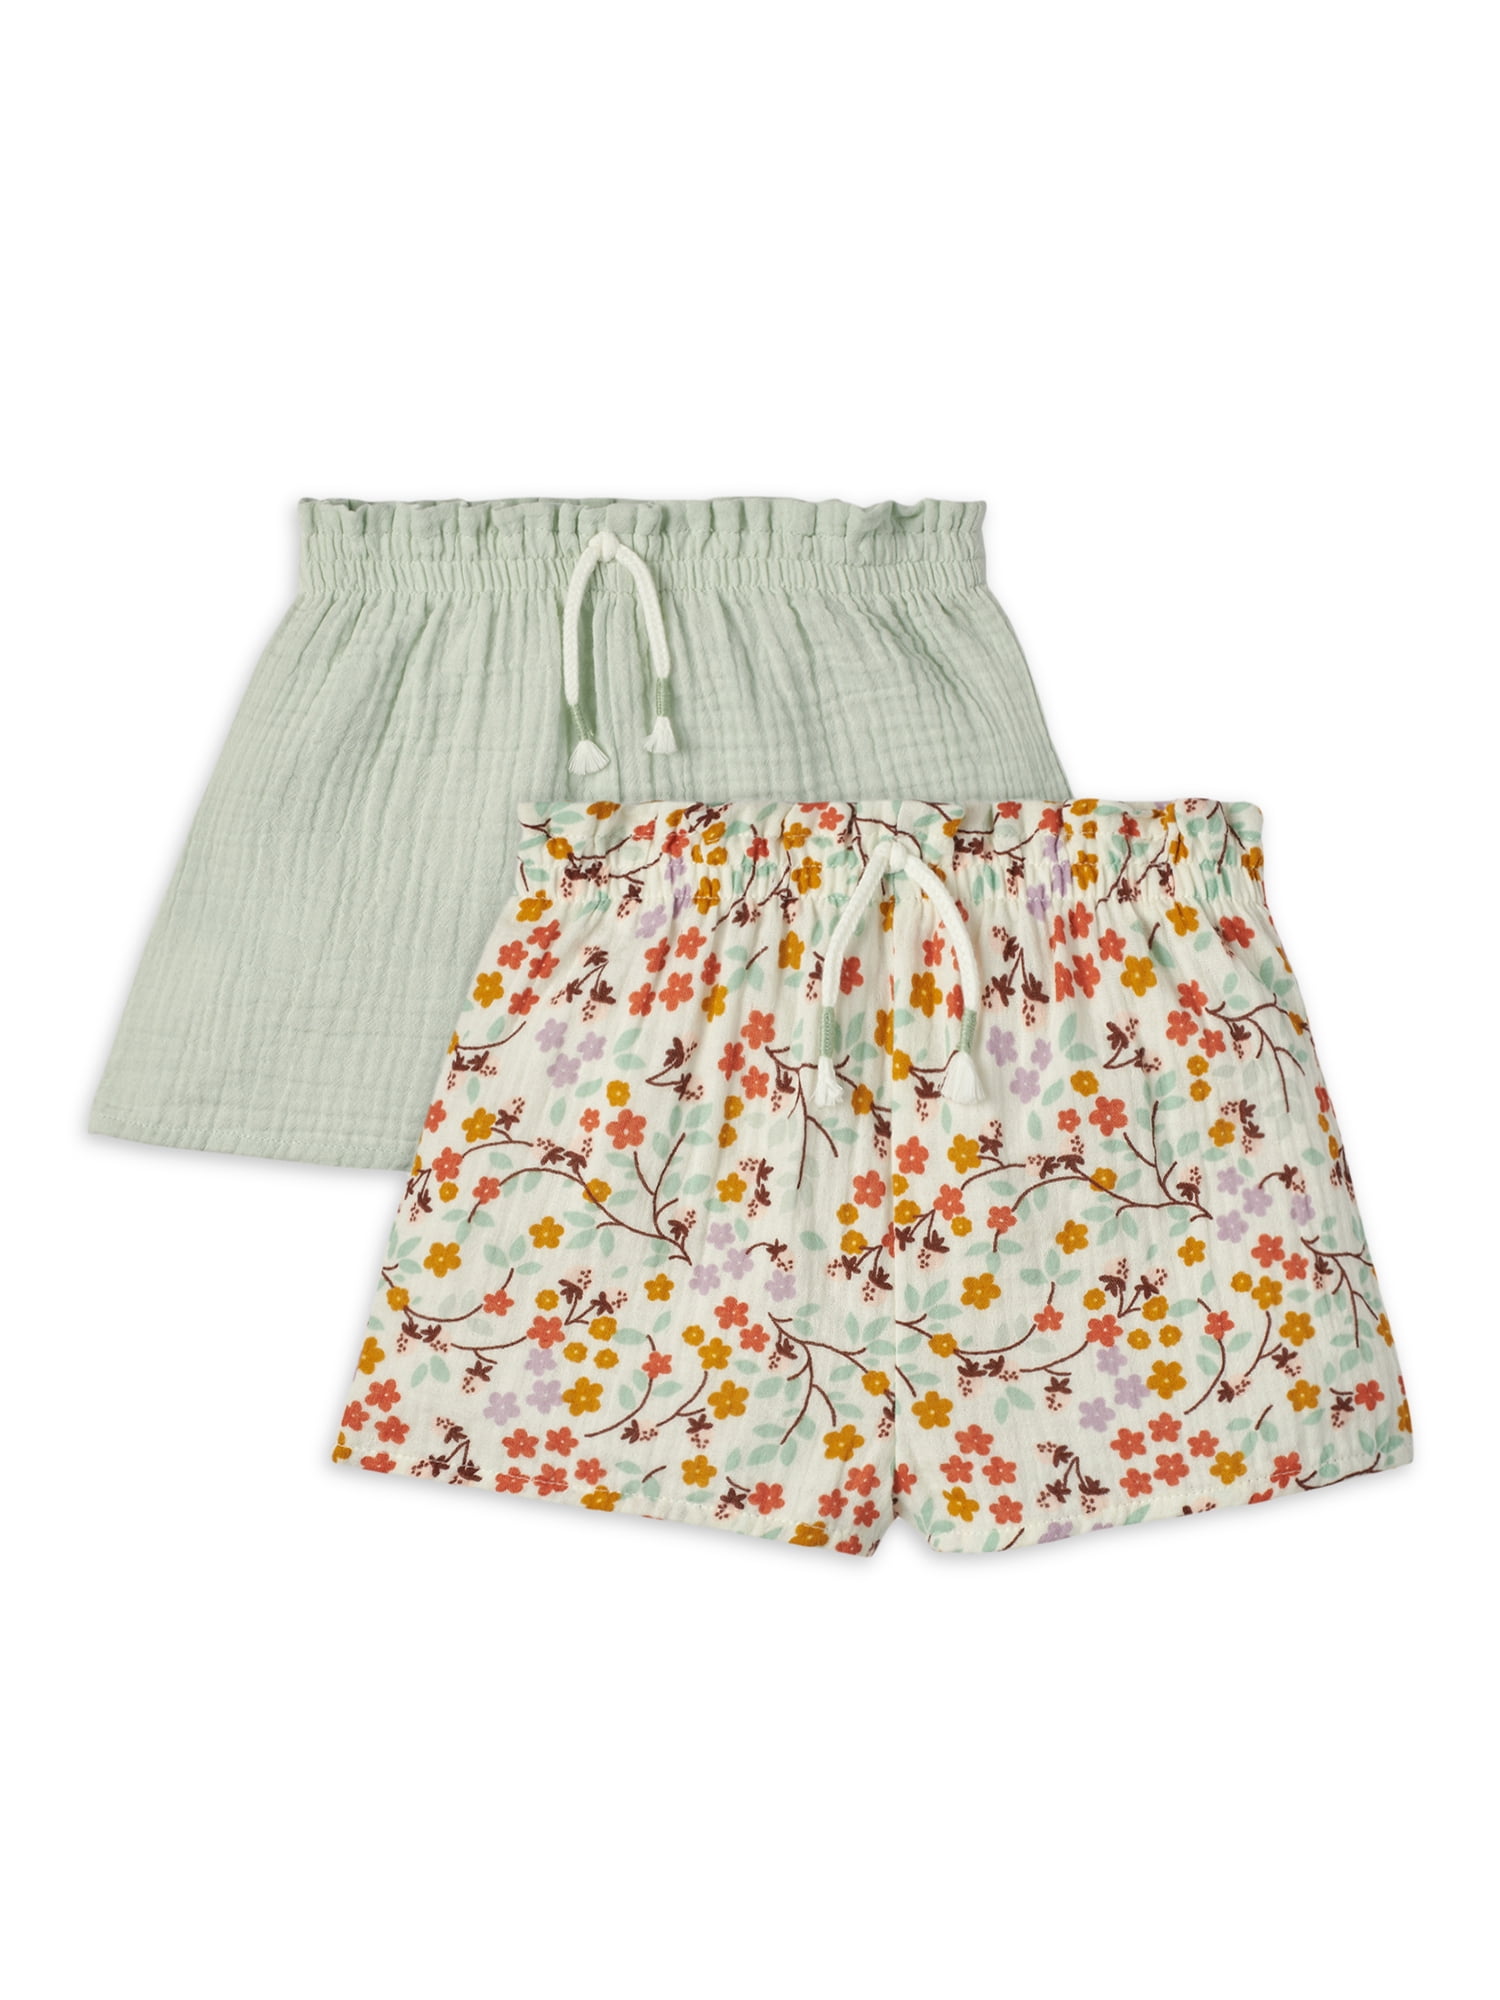 Modern Moments by Gerber Toddler Girl Gauze Shorts, 2-Pack, Sizes 12M-5T